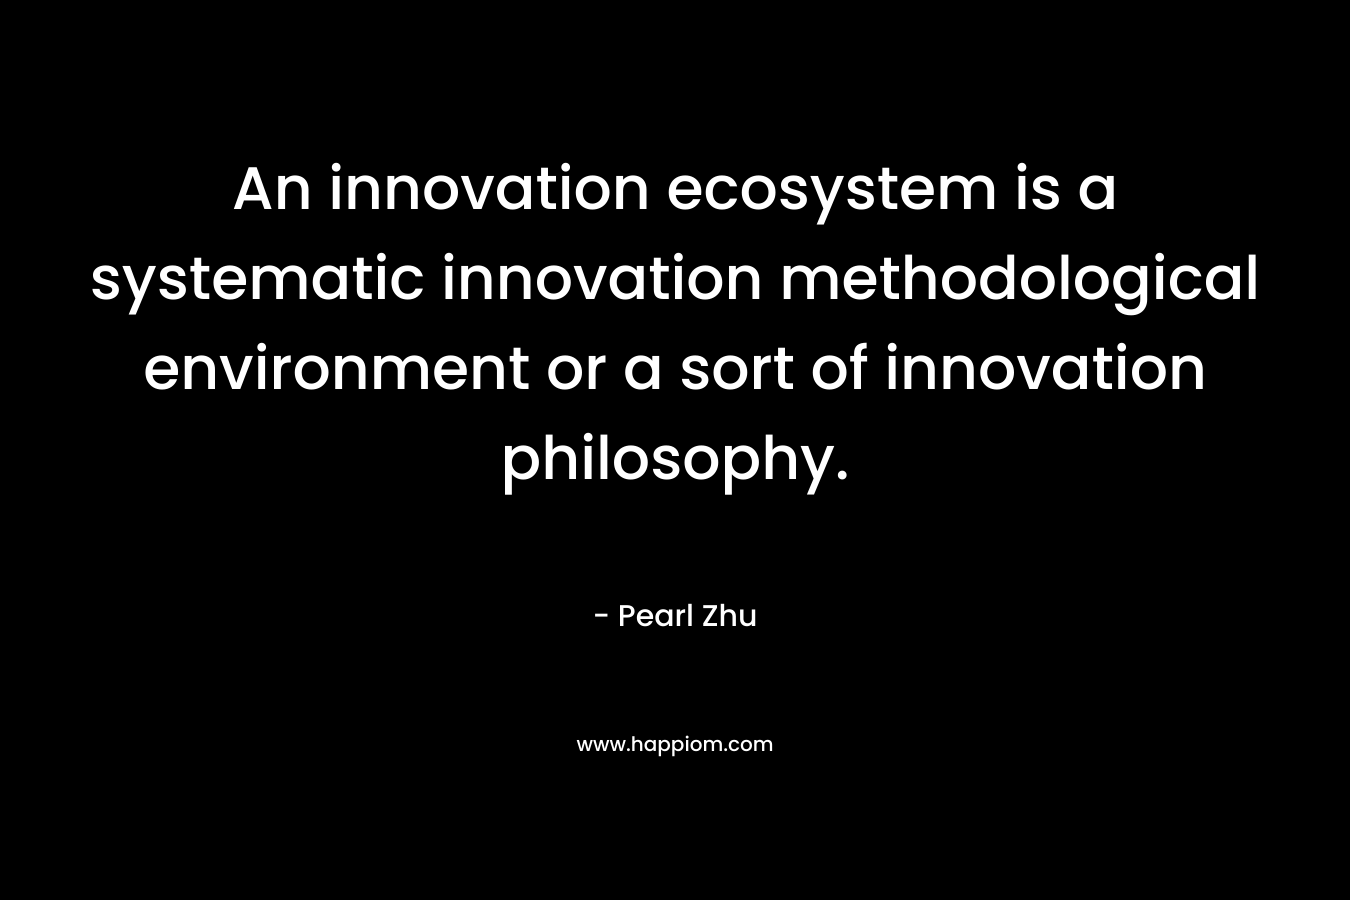 An innovation ecosystem is a systematic innovation methodological environment or a sort of innovation philosophy.